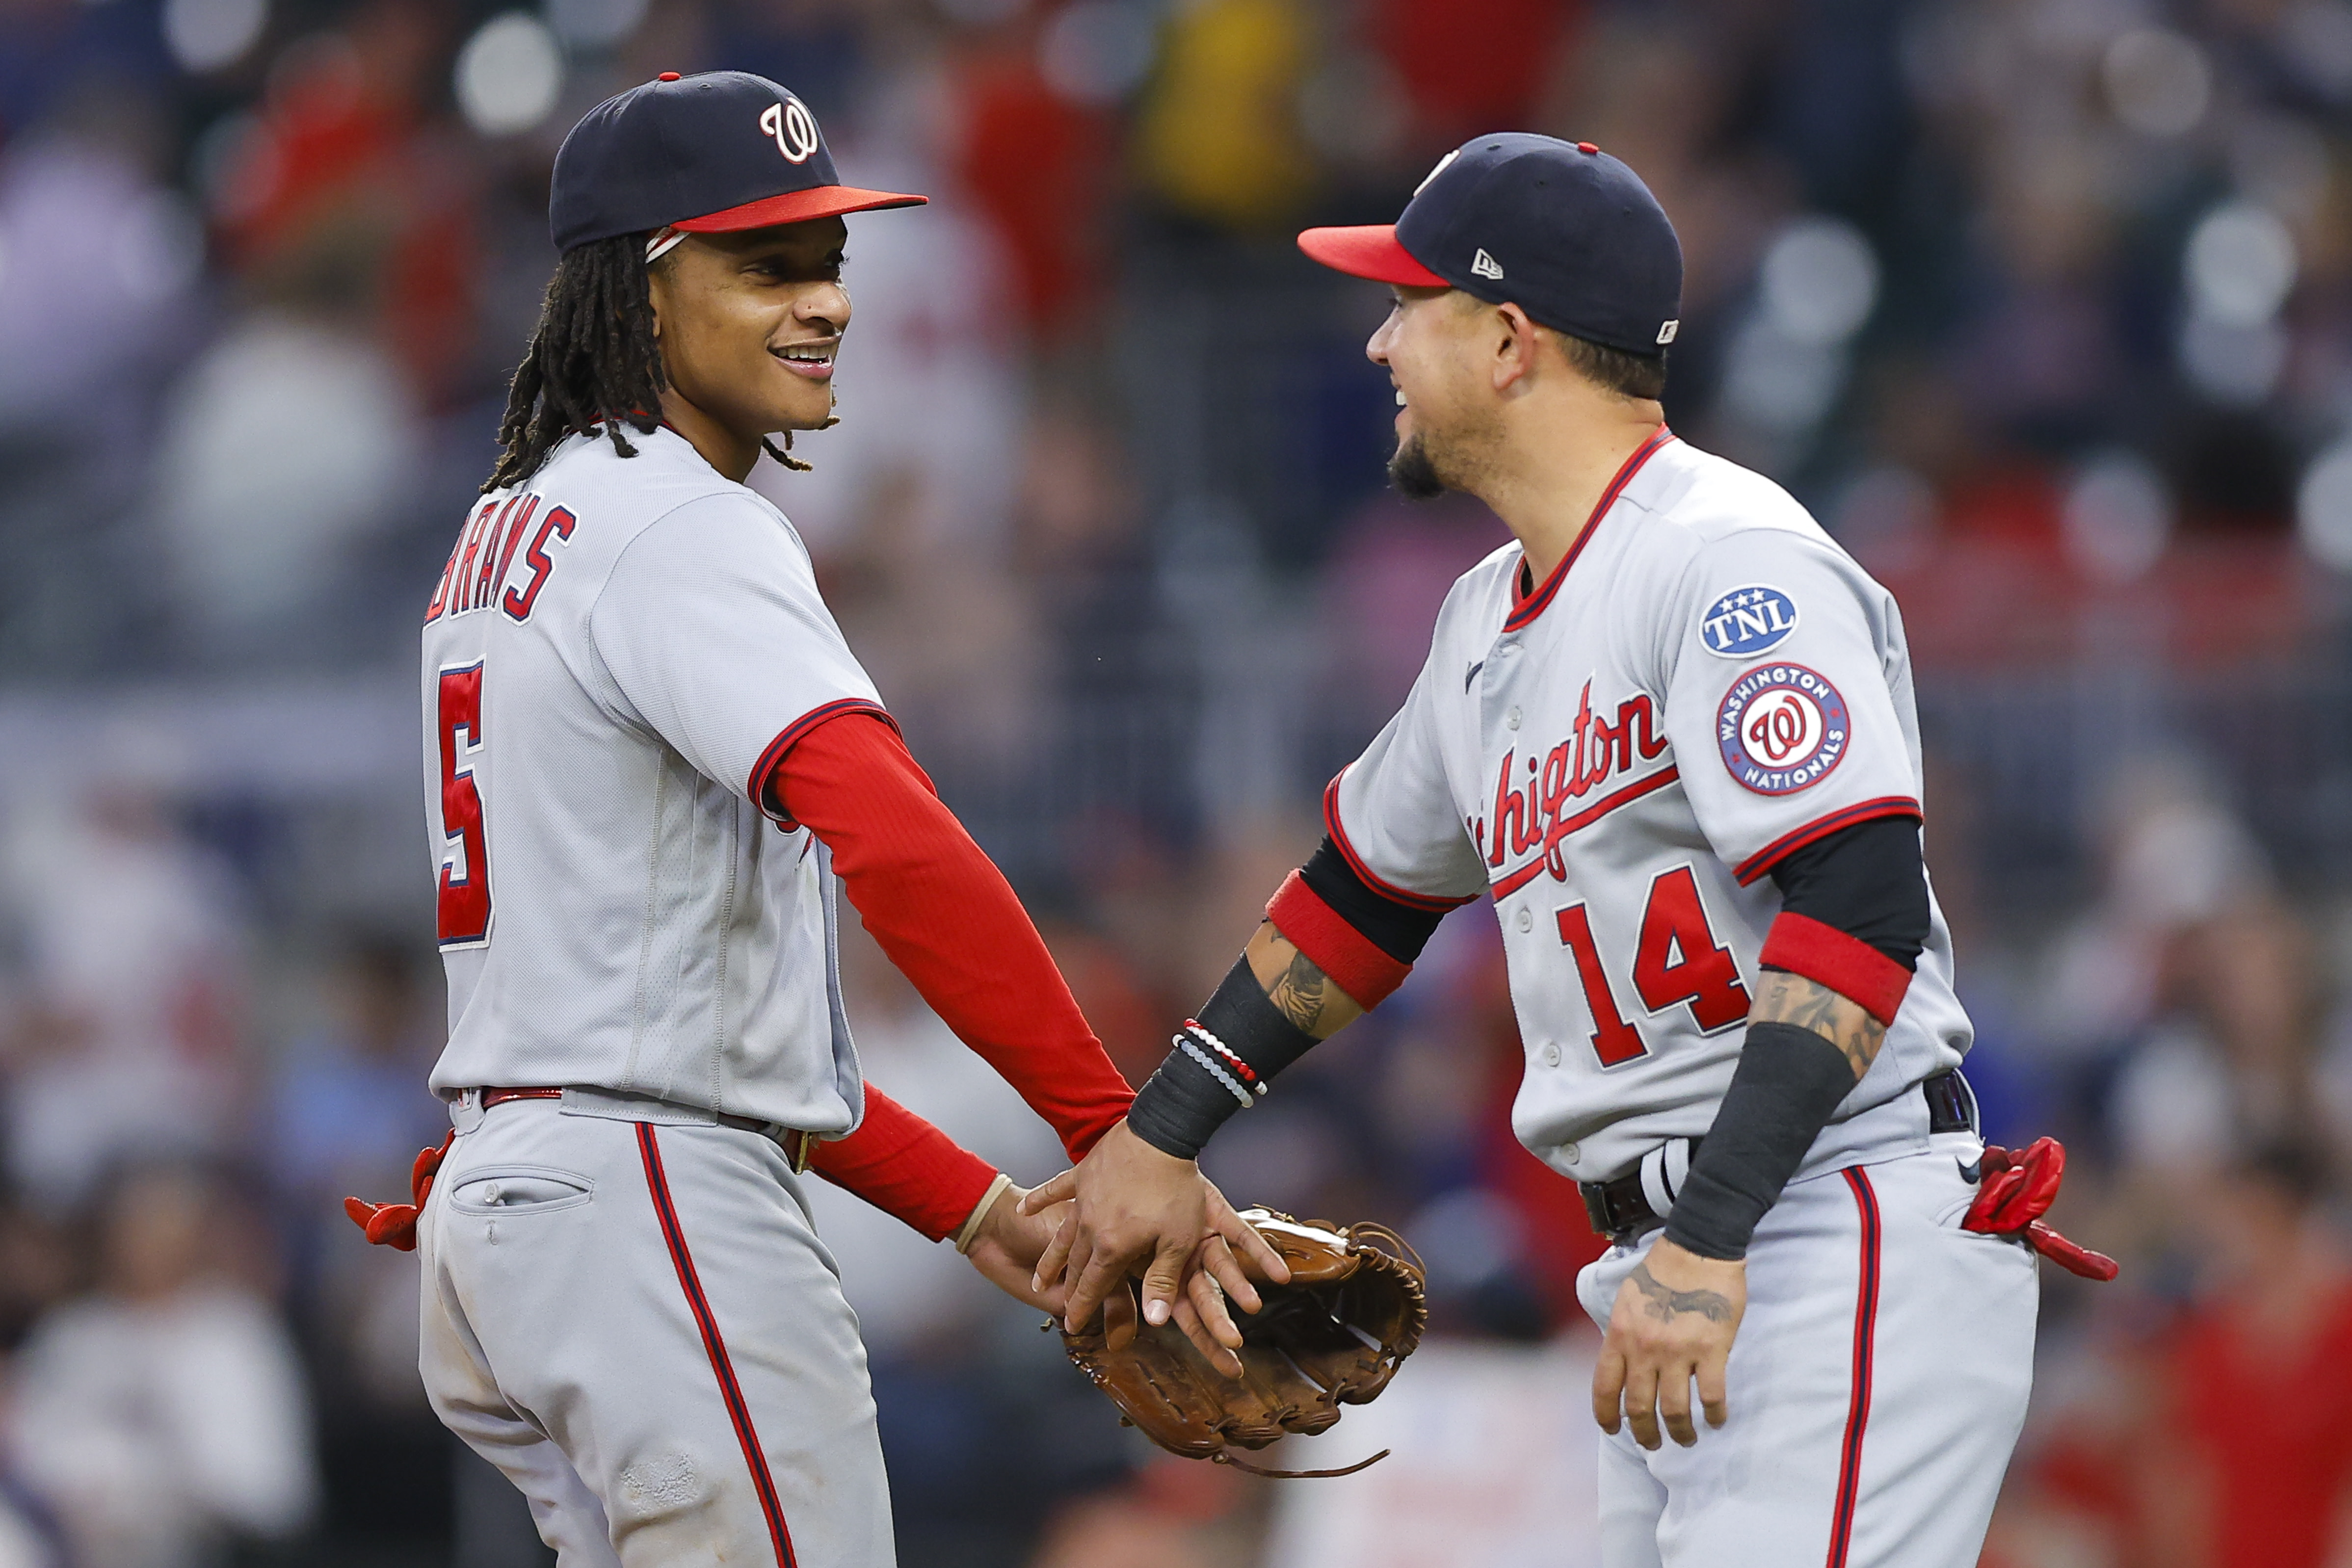 The Best and Worst Uniforms of All Time: The Washington Nationals